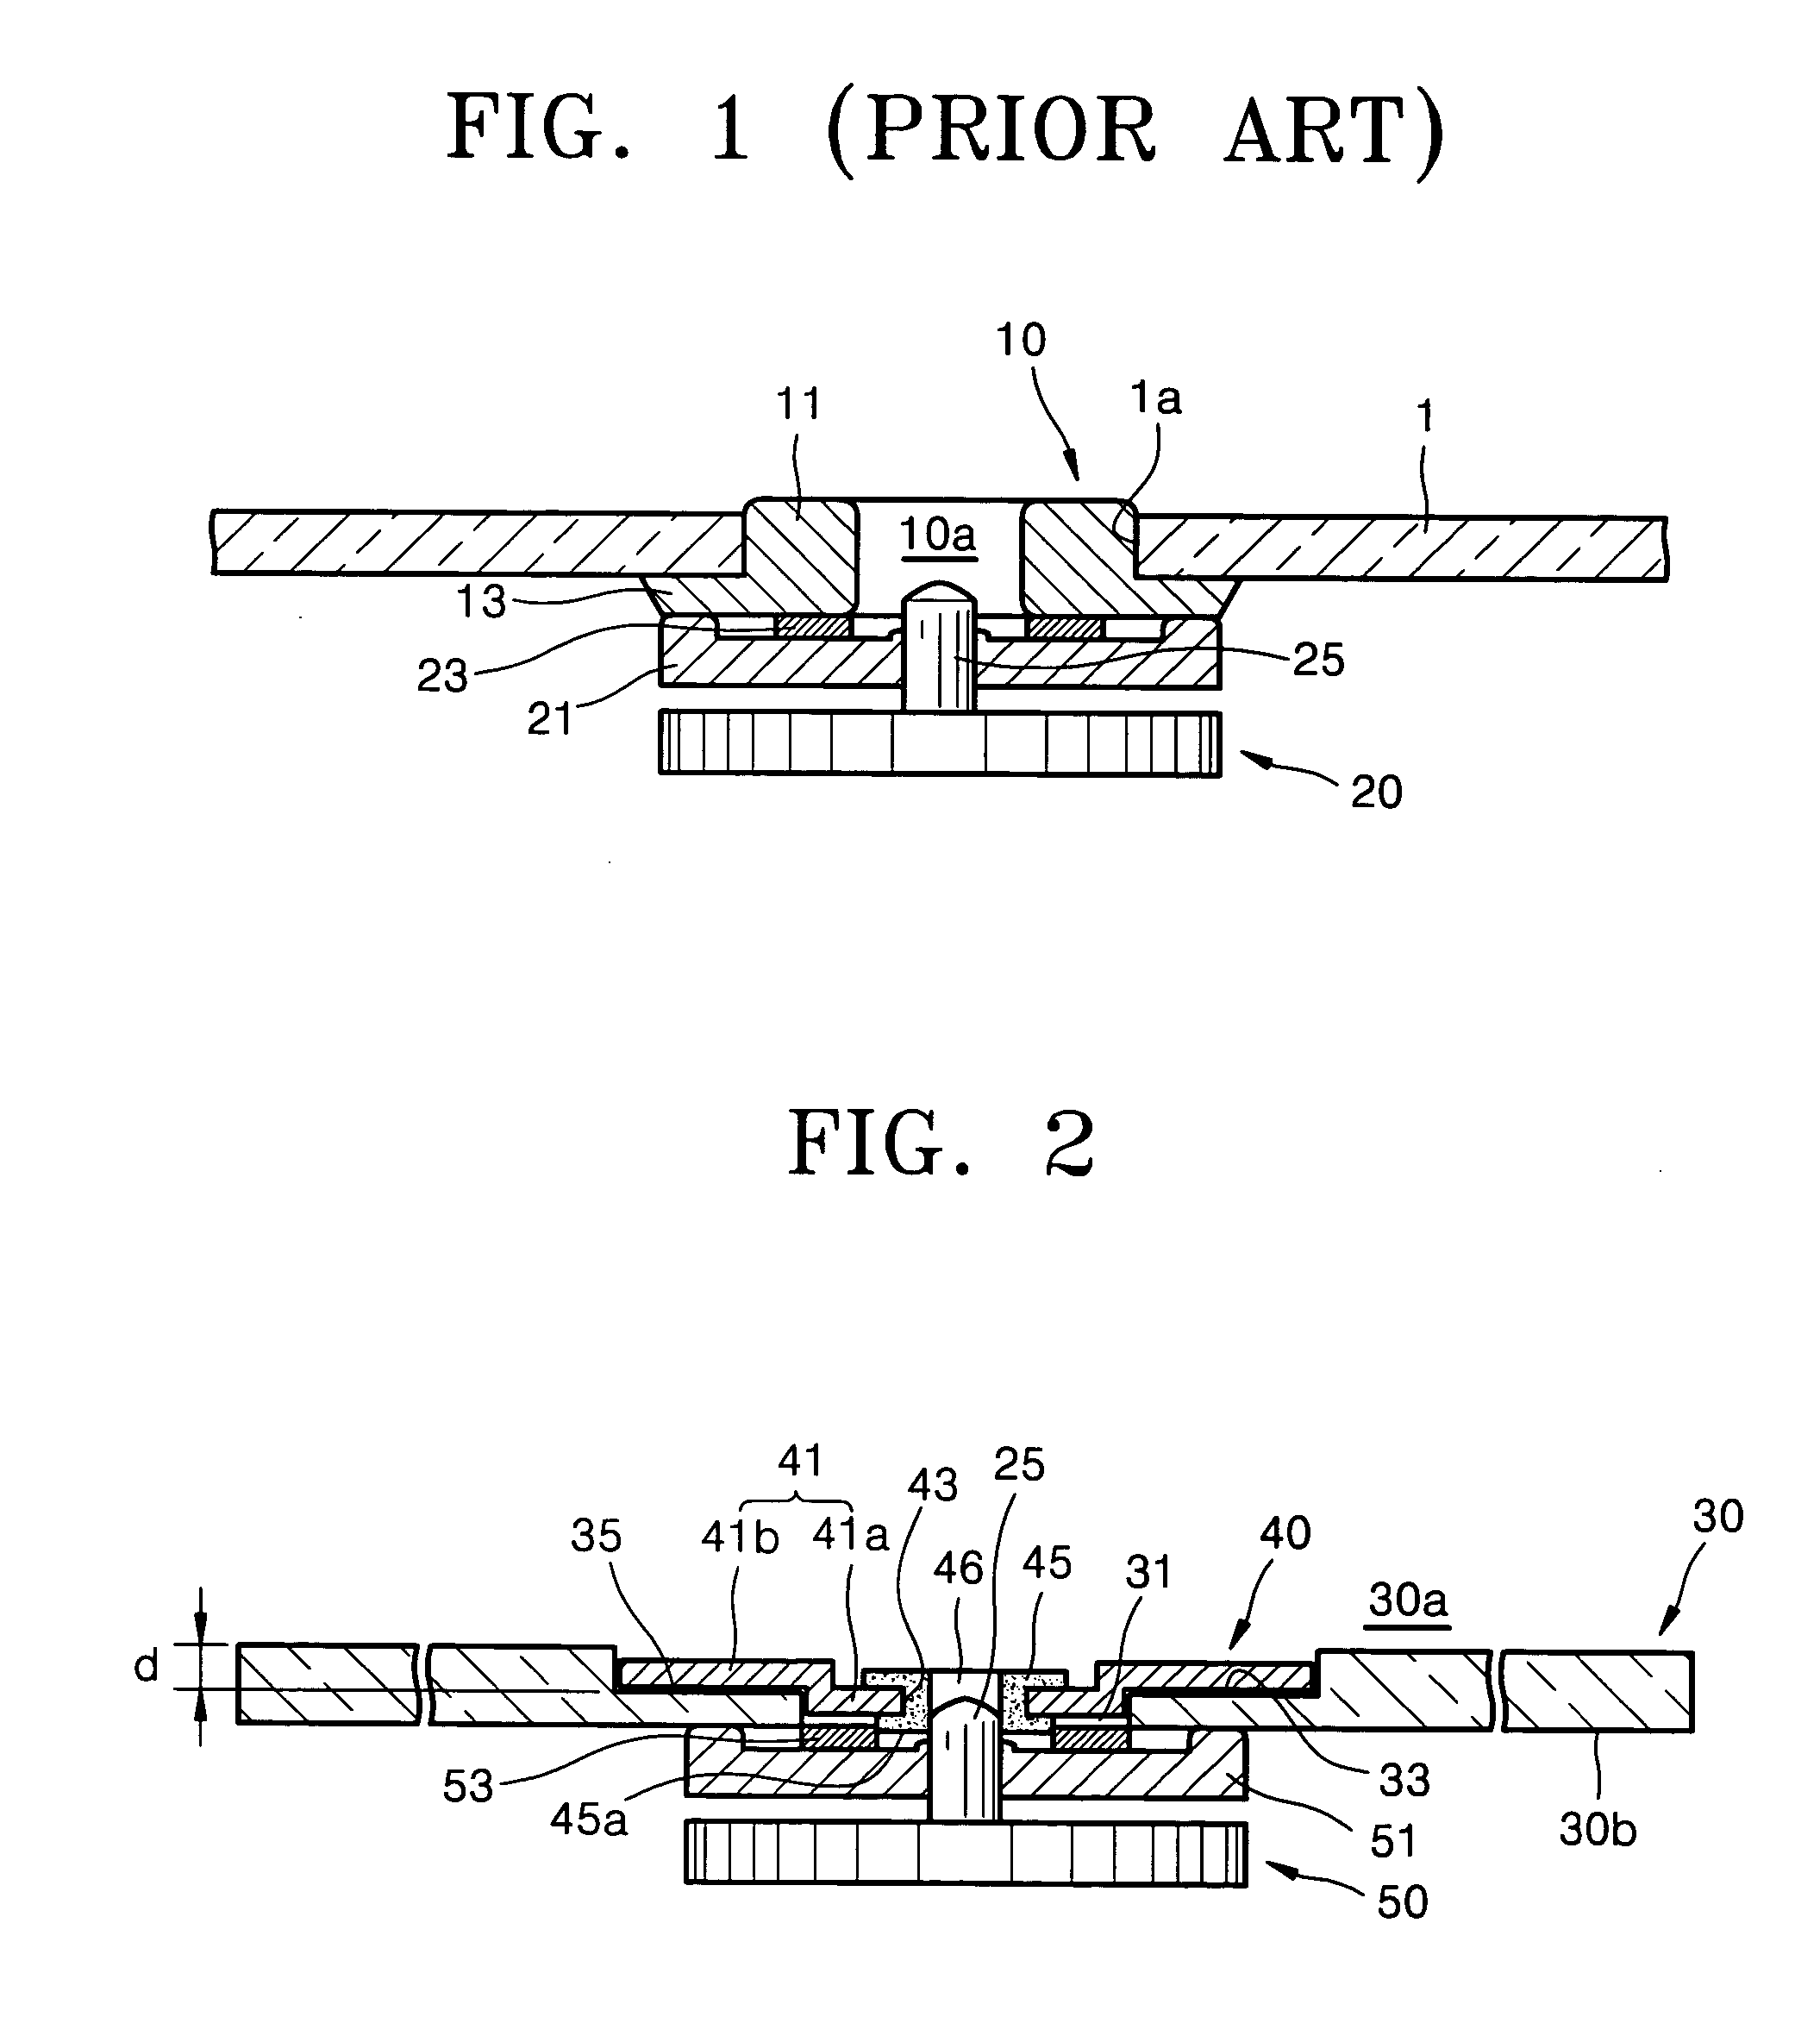 Hub-mounted optical disk, method for fabricating optical disk, and injection molding die for manufacturing optical disk substrate